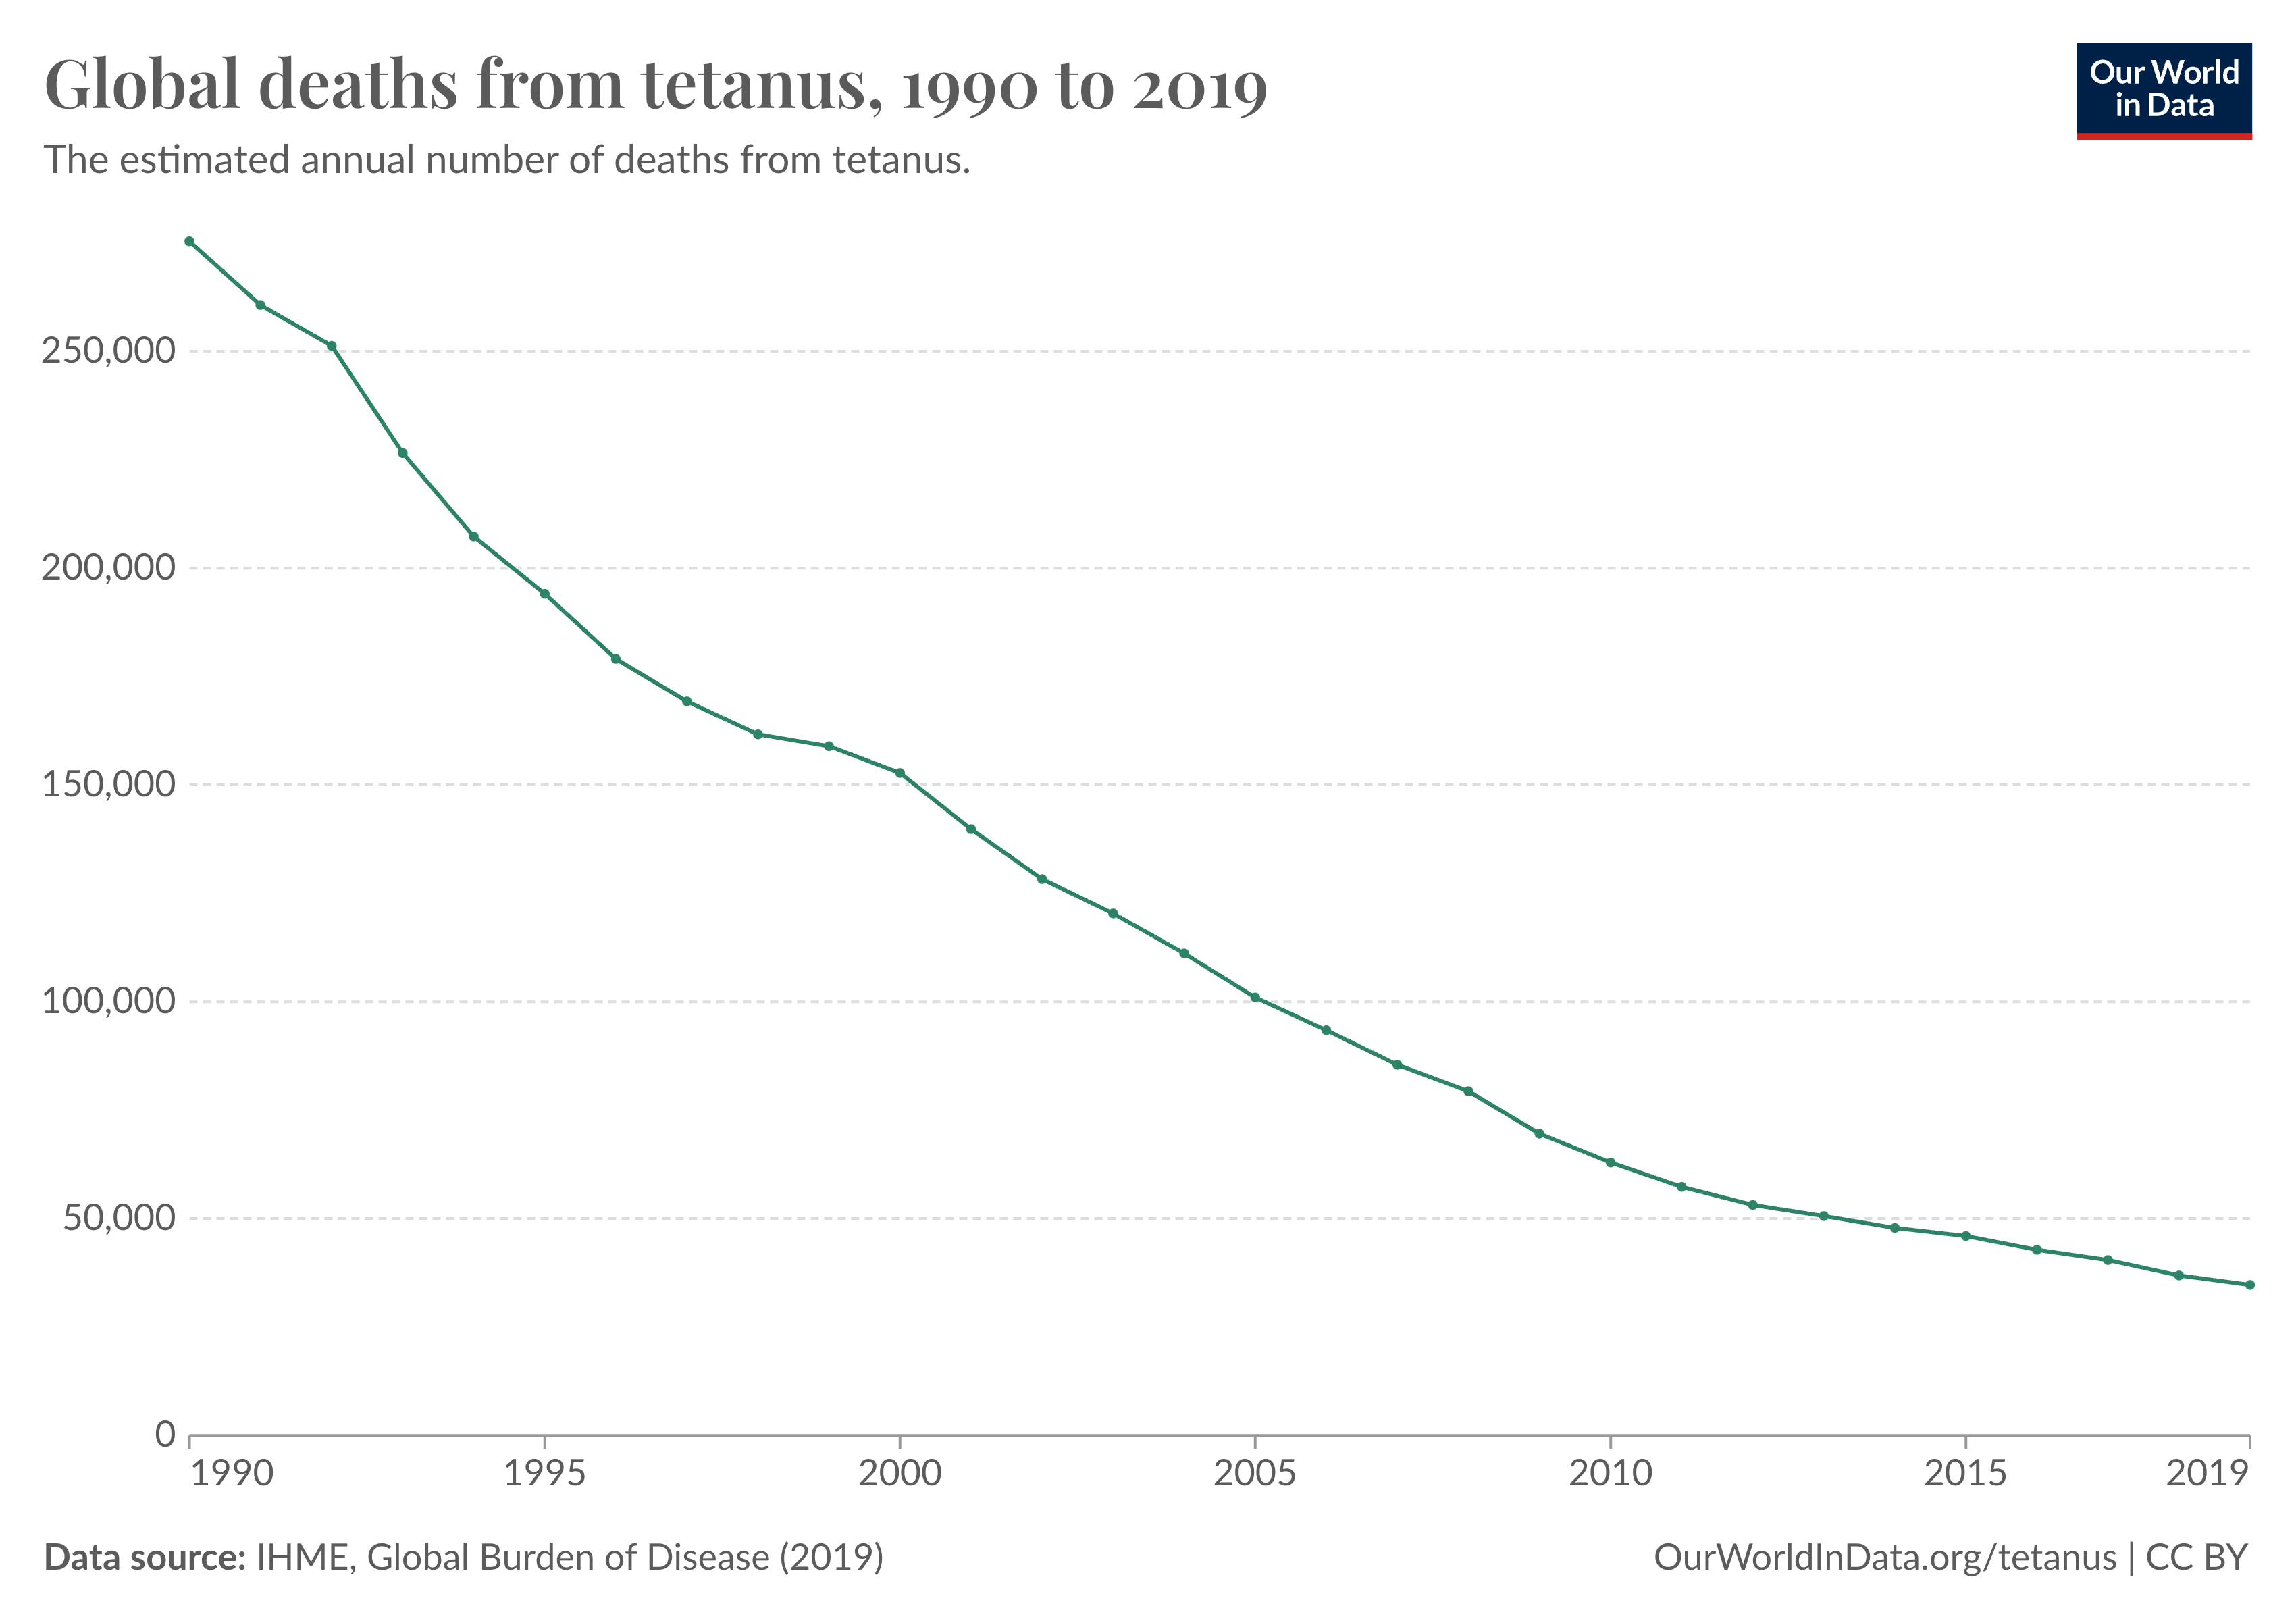 Tetanus is a bacterial disease that causes paralysis and can lead to death.

Globally, it was estimated to kill more than 250,000 annually in the early 1990s, mostly children.

By 2019, annual deaths were under 35,000.

As more children received the combined vaccine against diphtheria, tetanus and pertussis (DTP), deaths have fallen massively.
